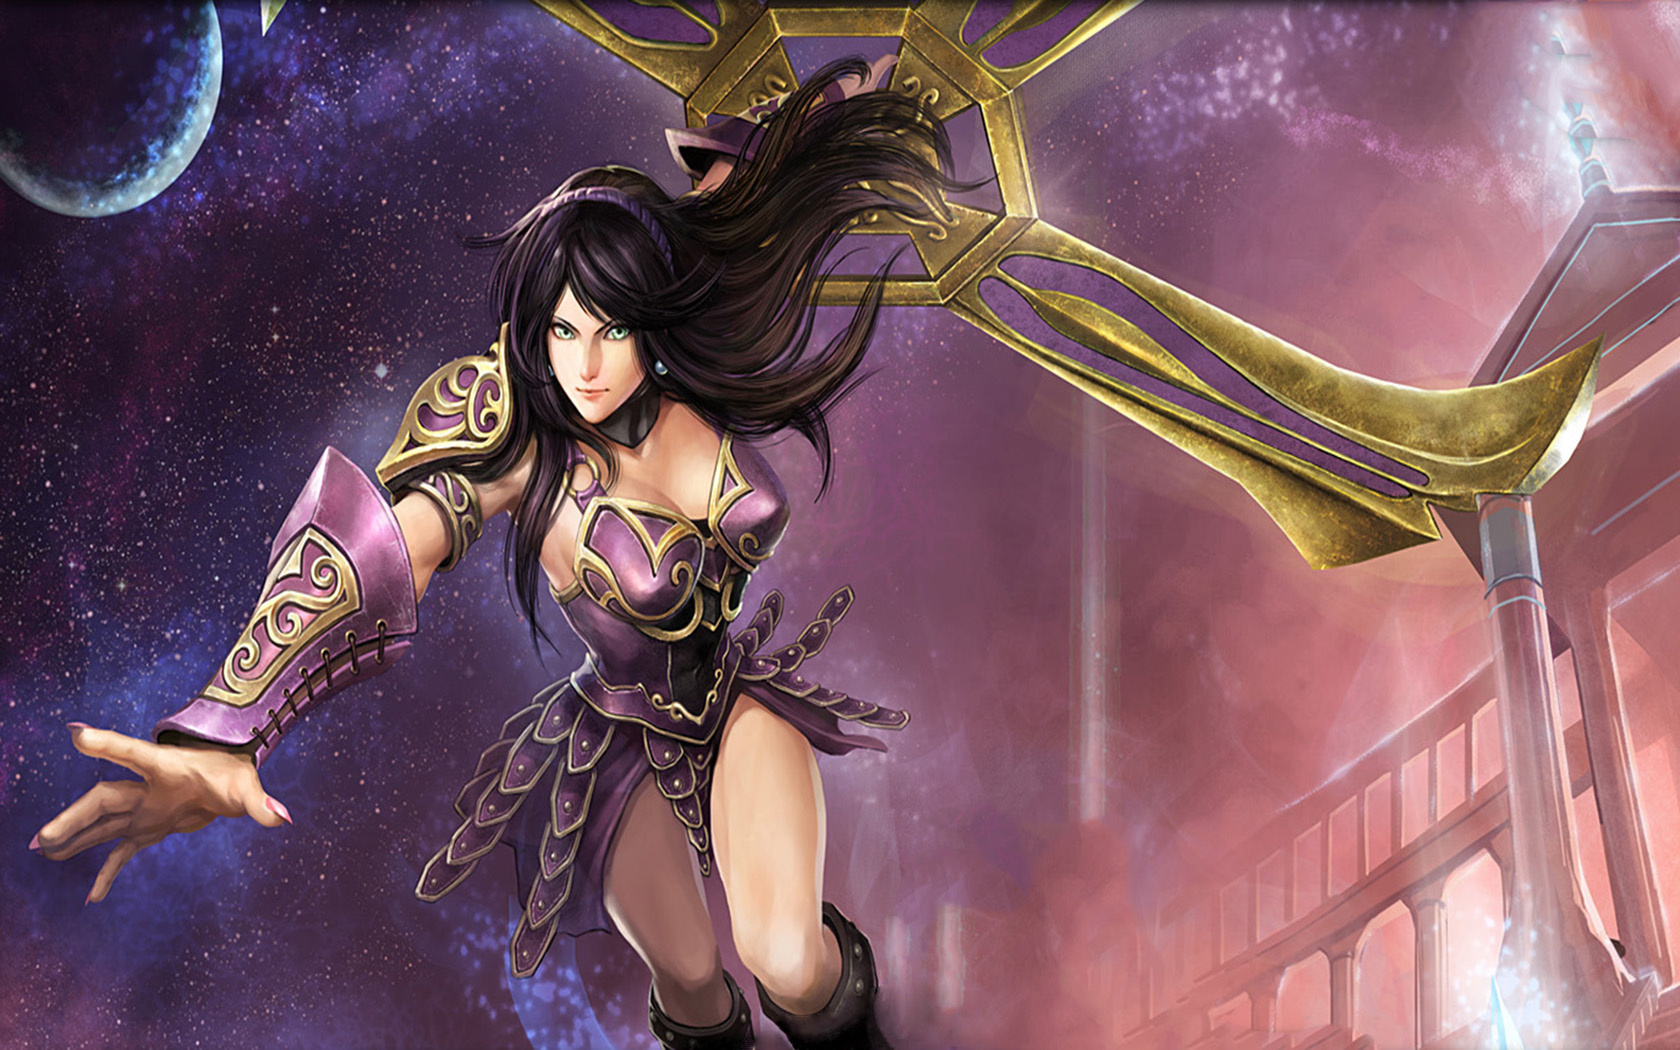 Sivir, the video game character from League of Legends, in a striking desktop wallpaper.